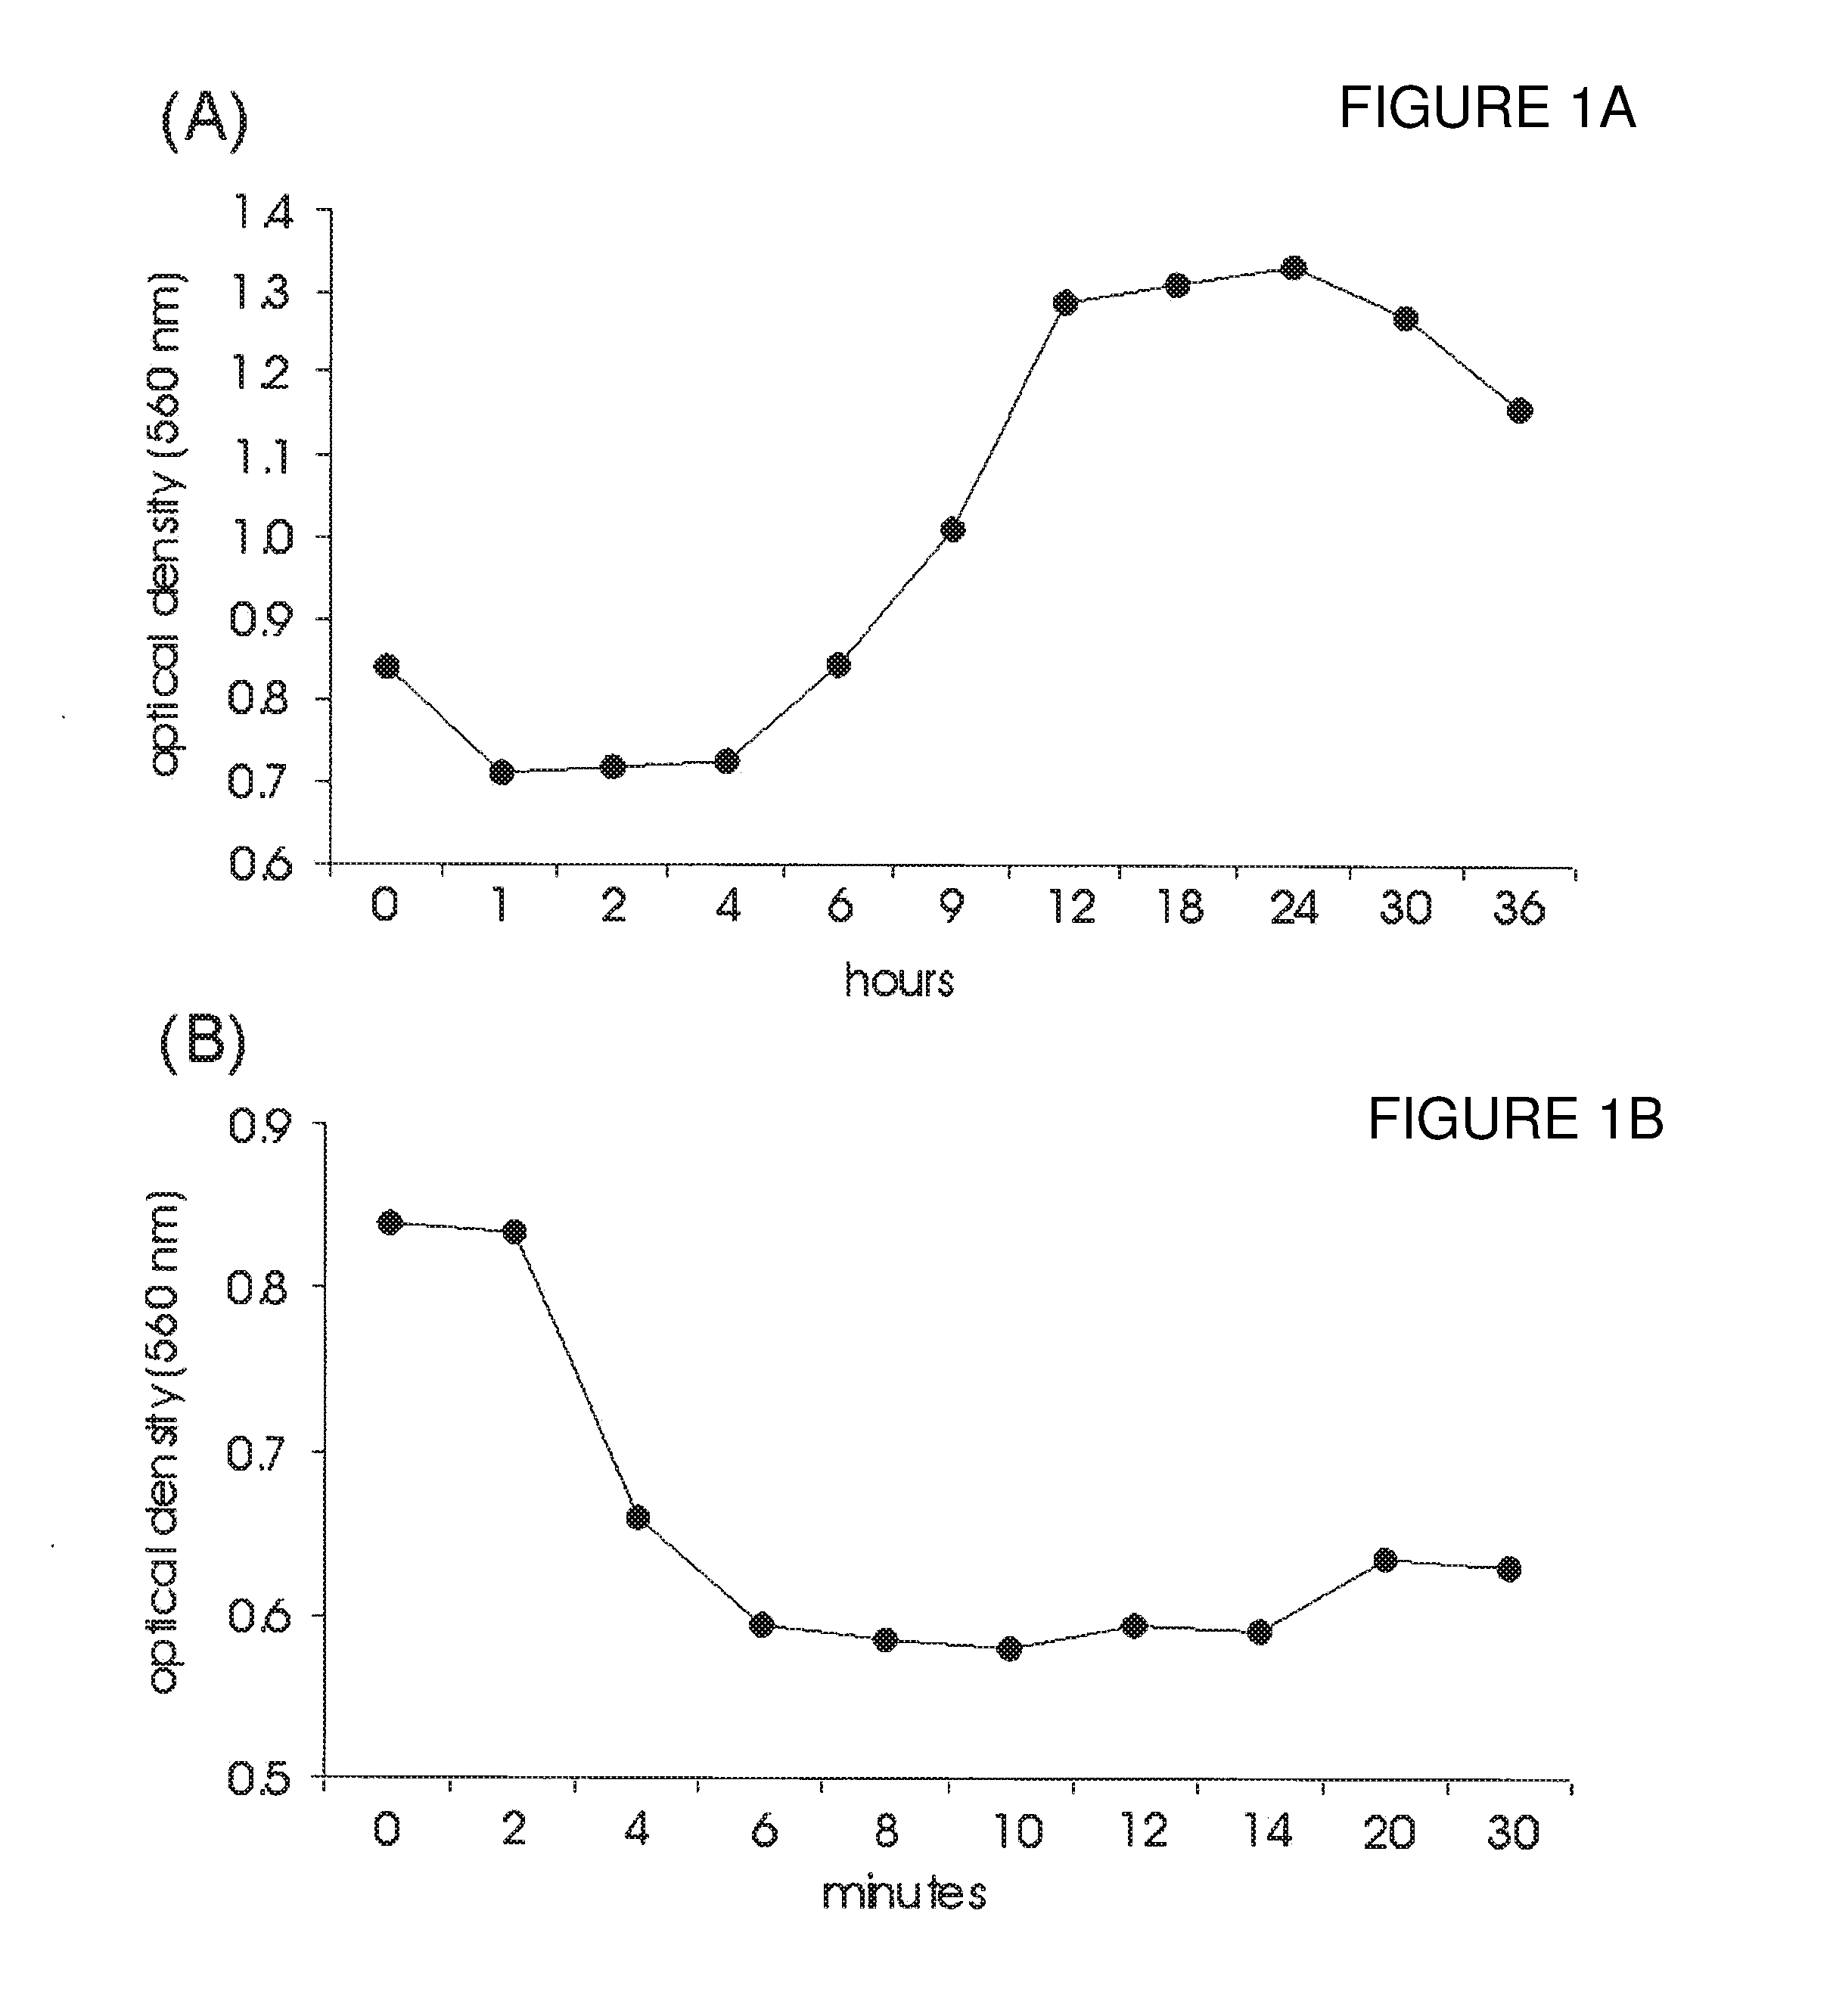 Targets and compositions for use in decontamination, immunoprophylaxis, and post-exposure therapy against anthrax